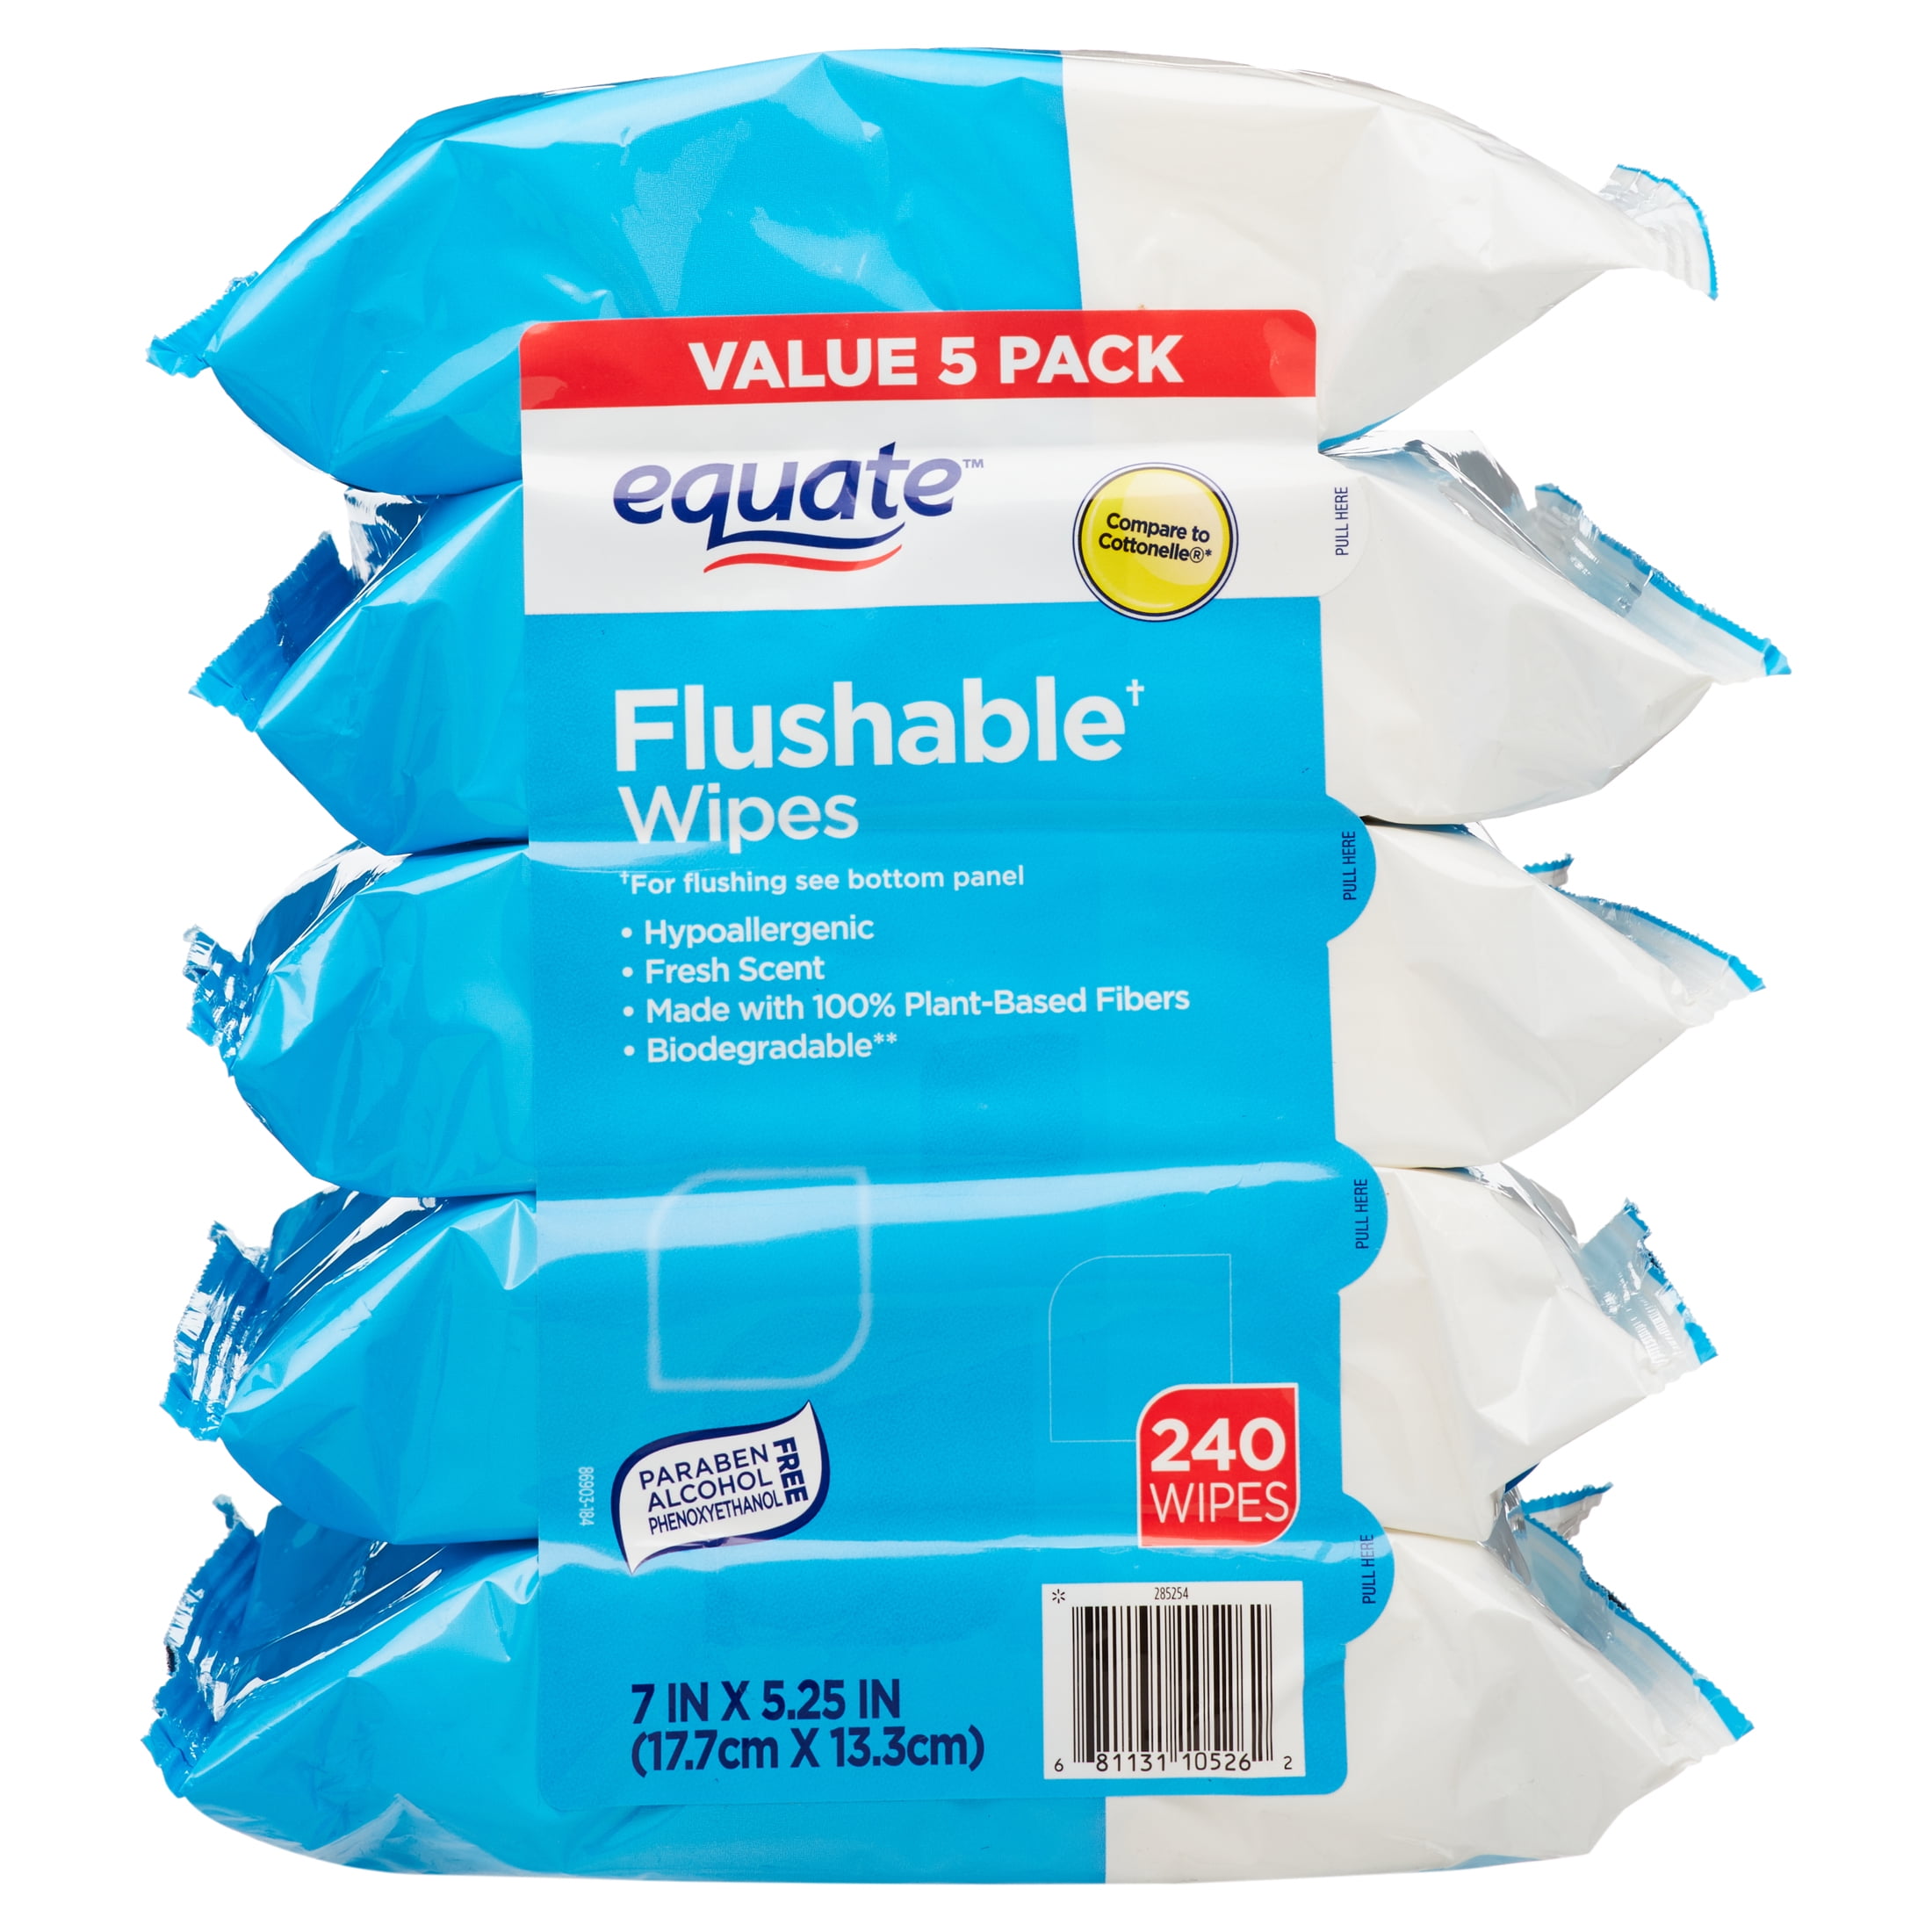 Details about   Hypoallergenic Equate Flushable Wipes 240 Ct Alcohol Free Fresh Scent,5 Packs 